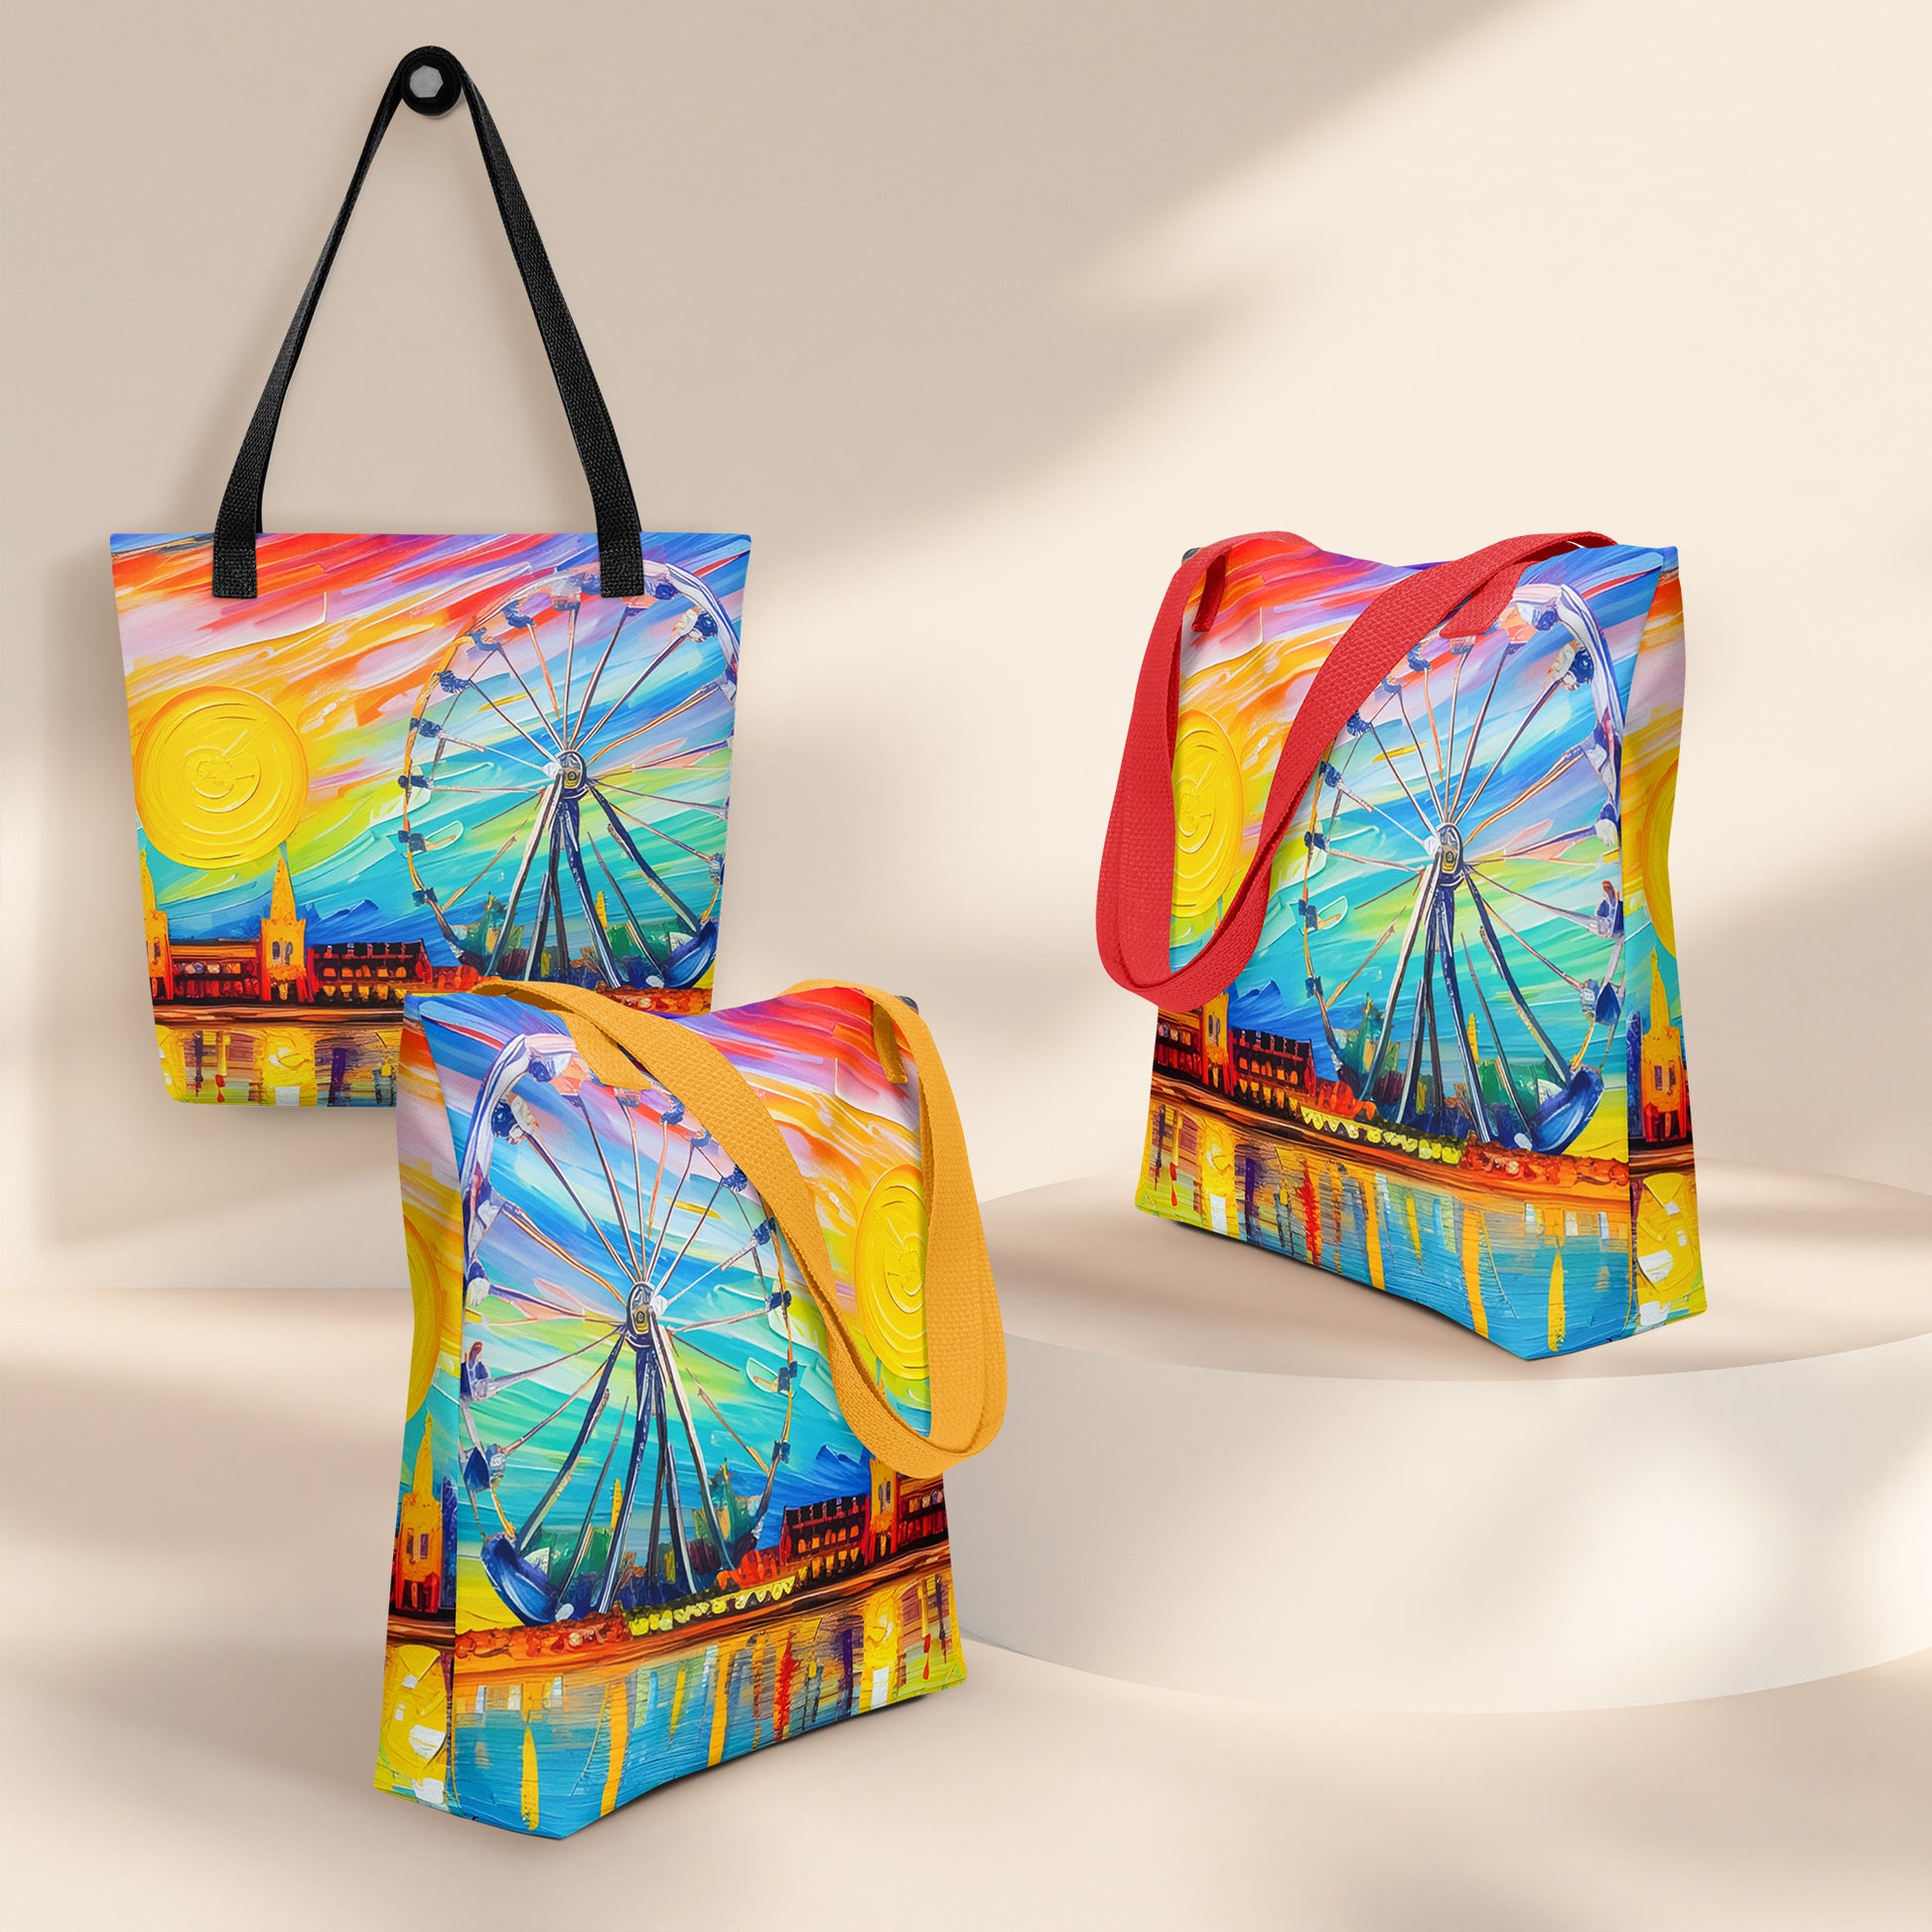 Fashion-forward tote bag to elevate your style | Seepu